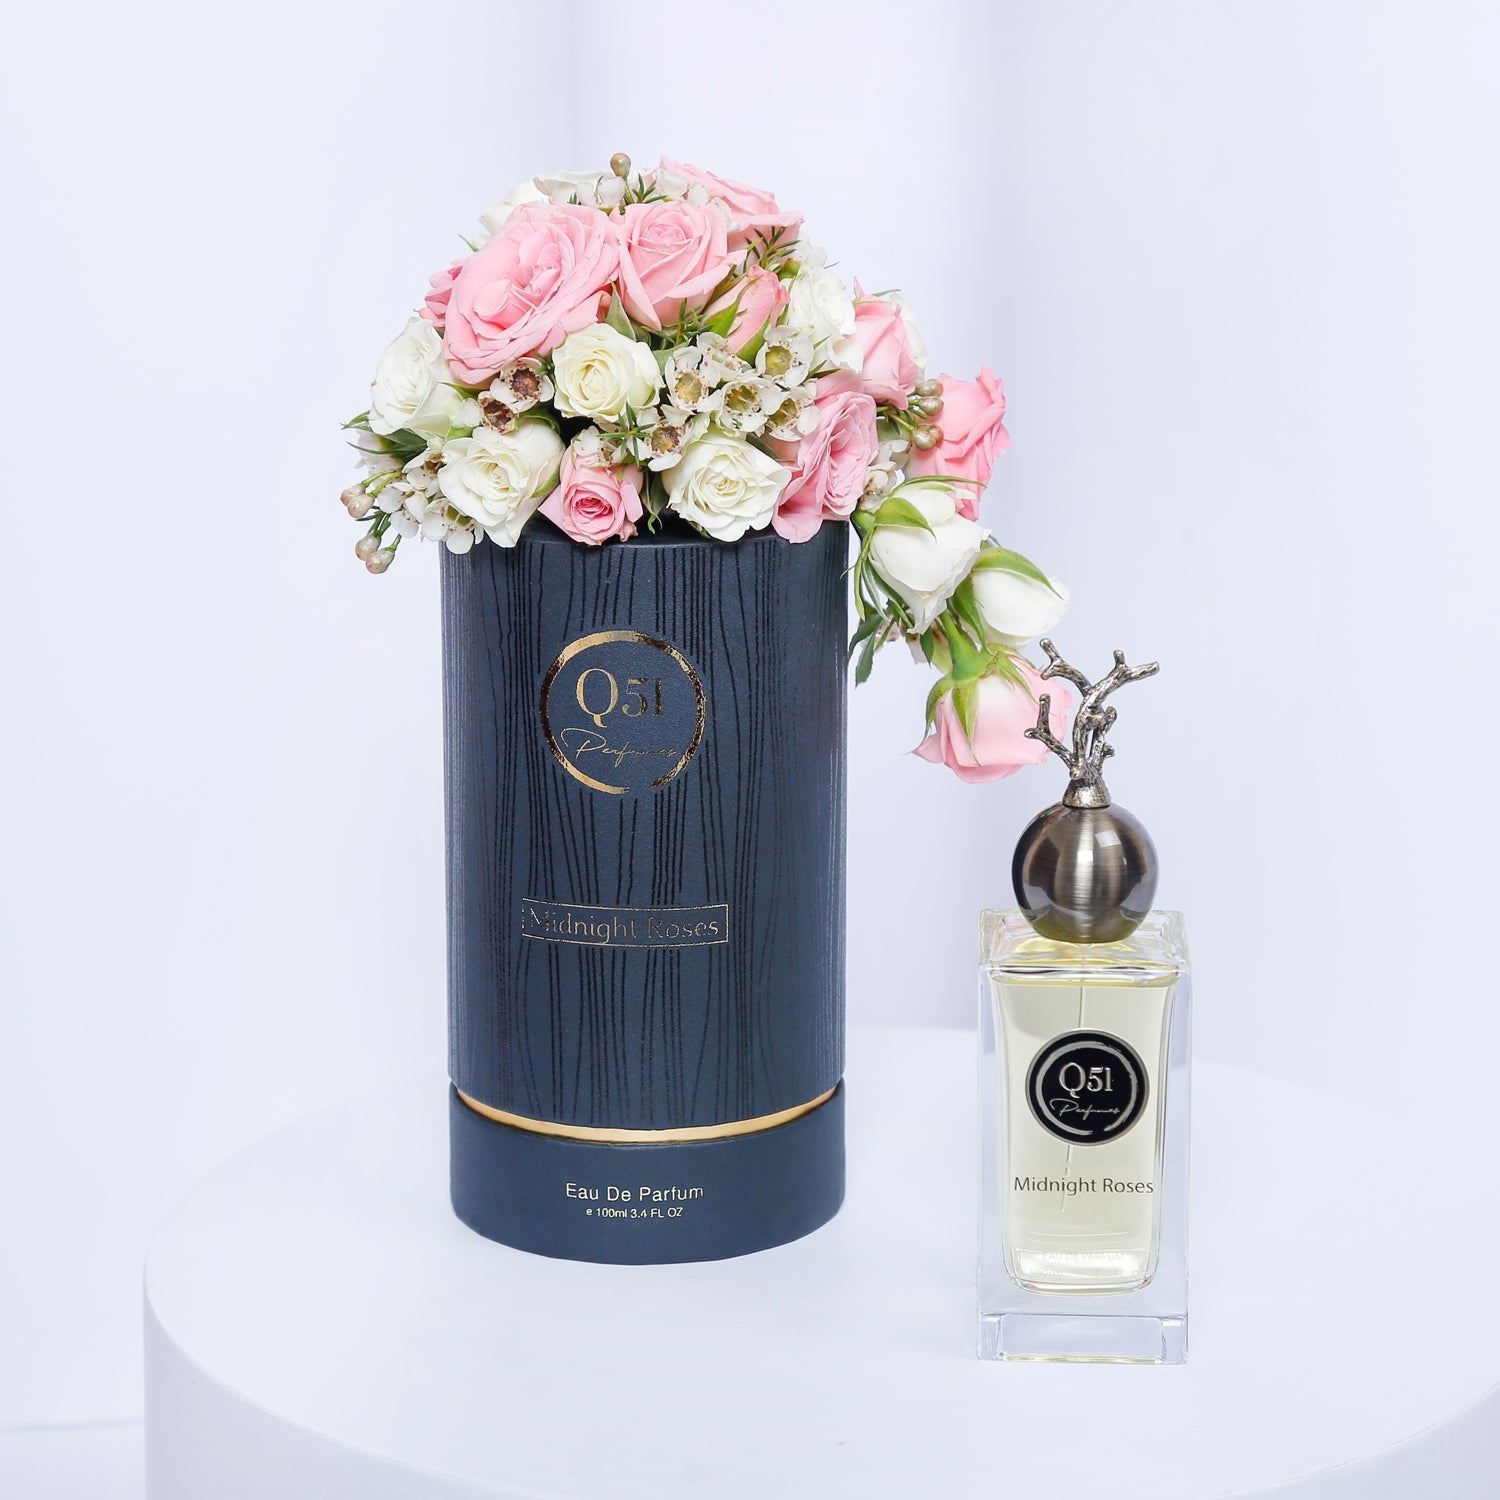 Midnight Roses EDP 100 ml from Q51 Perfumes